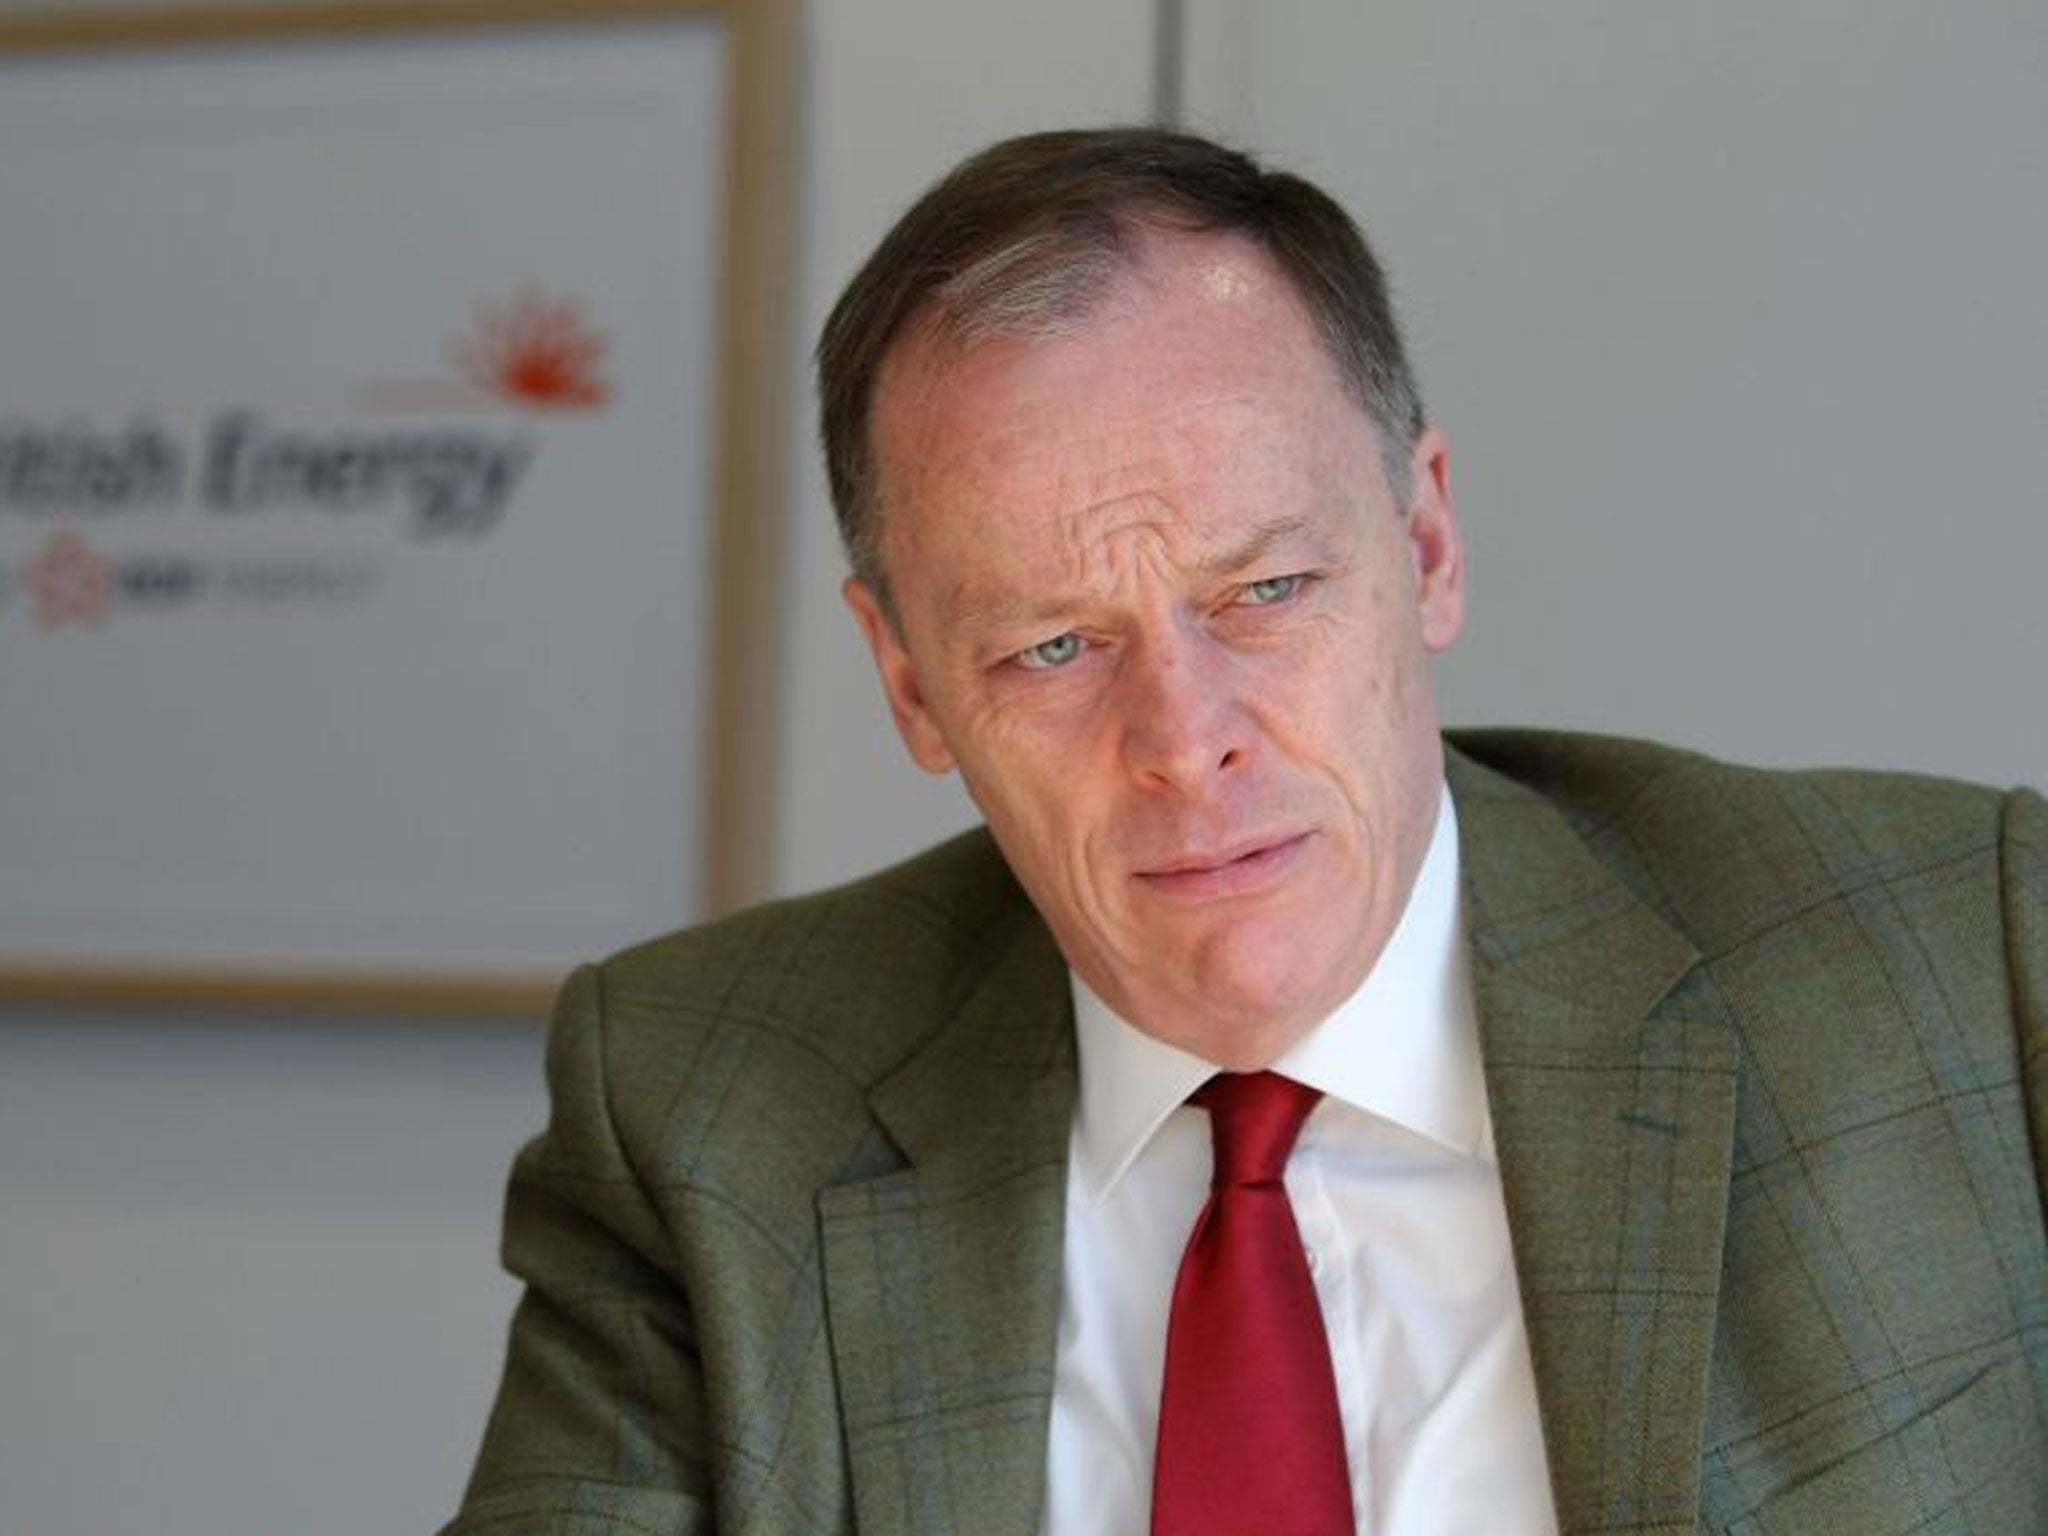 Vincent de Rivaz admitted that the energy industry faced a ‘crisis of trust’